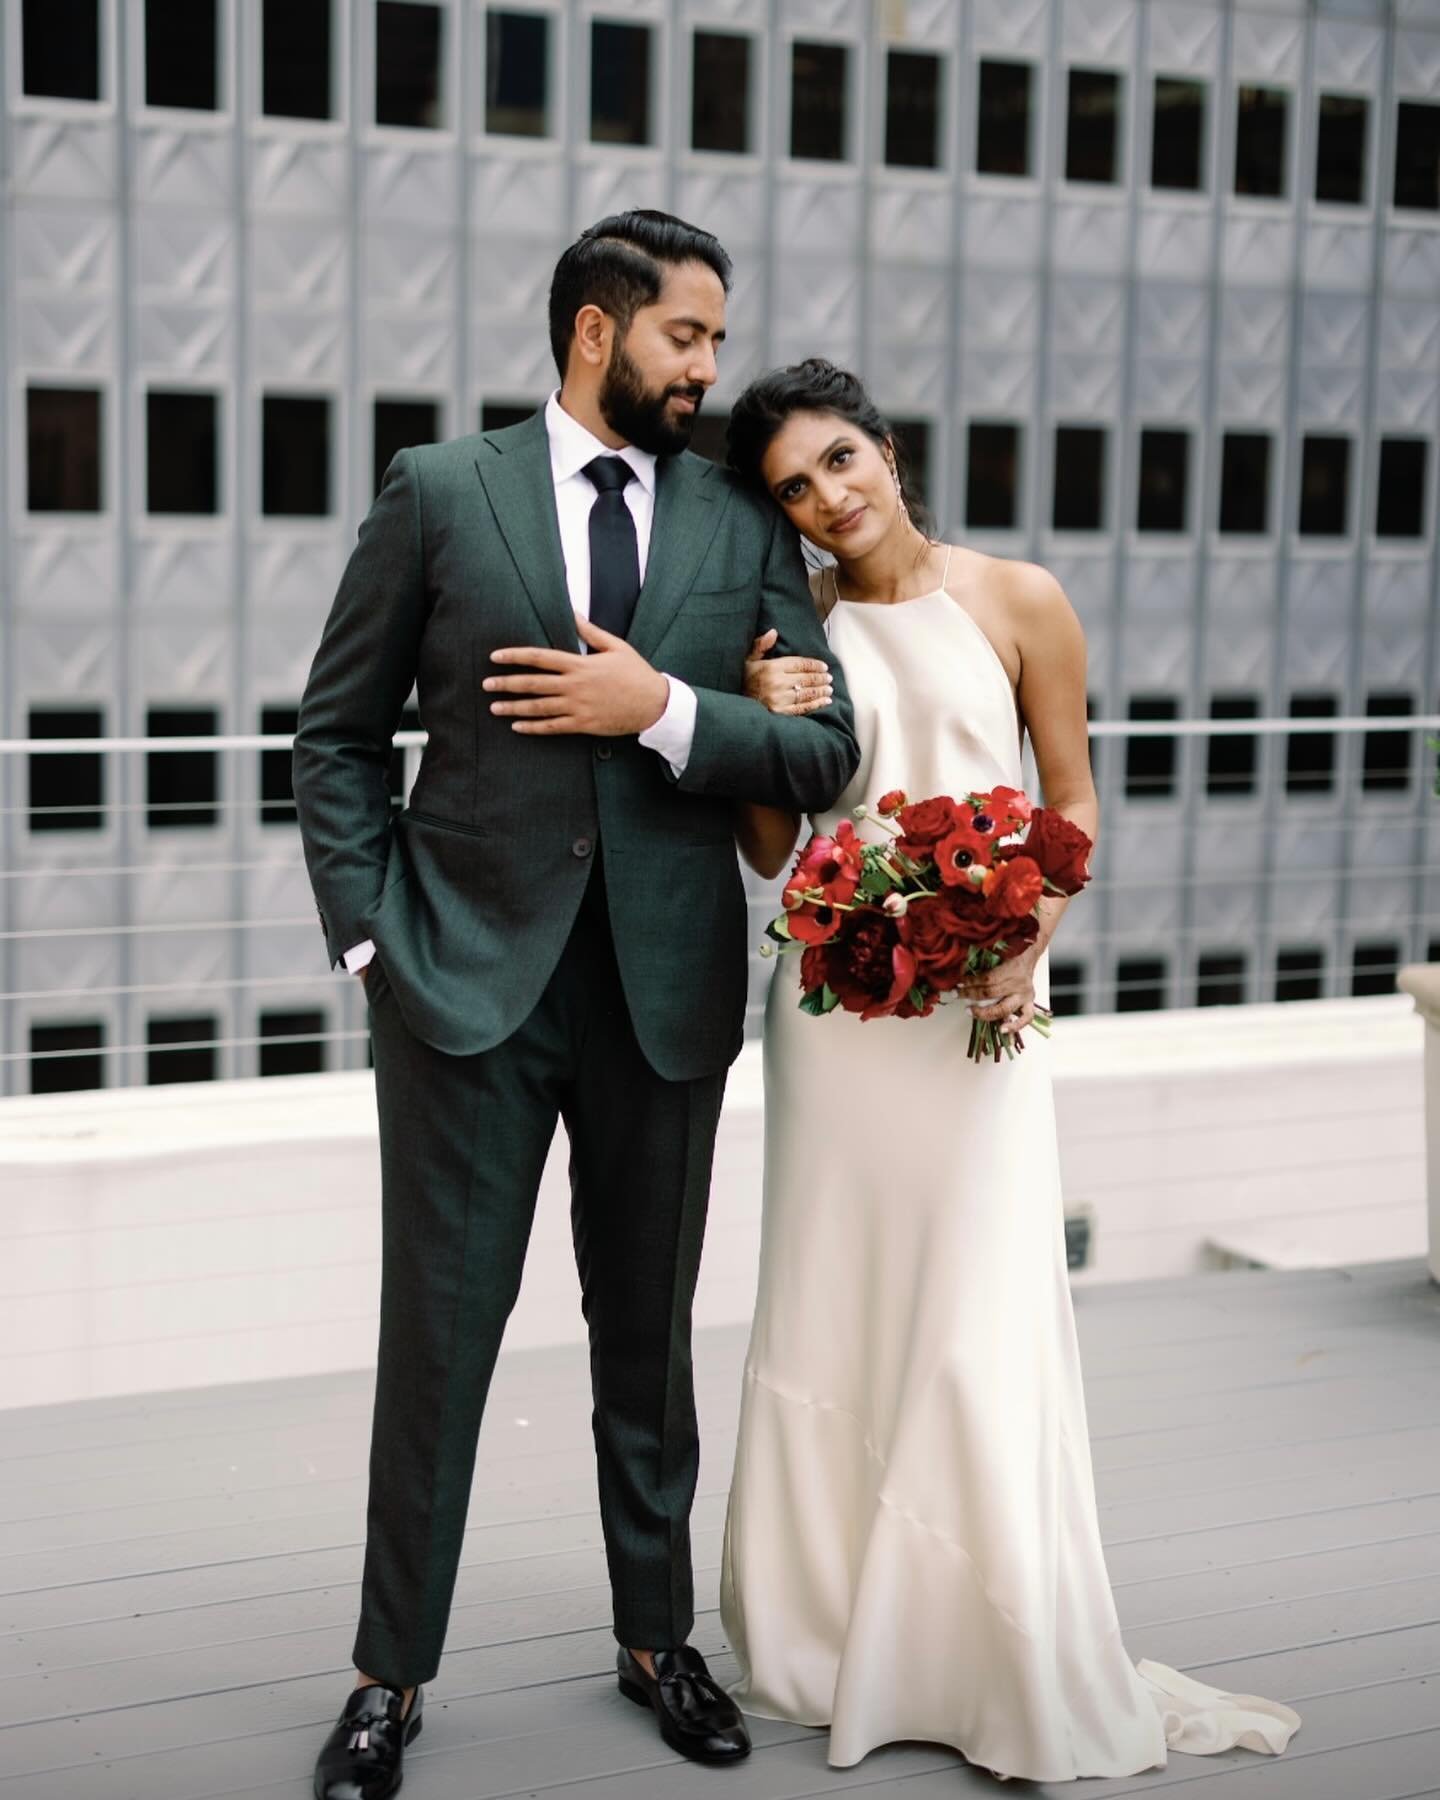 Happy anniversary to these two lovebirds @soniamin &amp; @s_patel0!

How has it already been a year? How?

Cheers to a fabulous vendor team:

Venue @venueat400northervay 
Planning &amp; Coordination @randreventstx 
Coordination Assist. @dejaacatt 
Ba